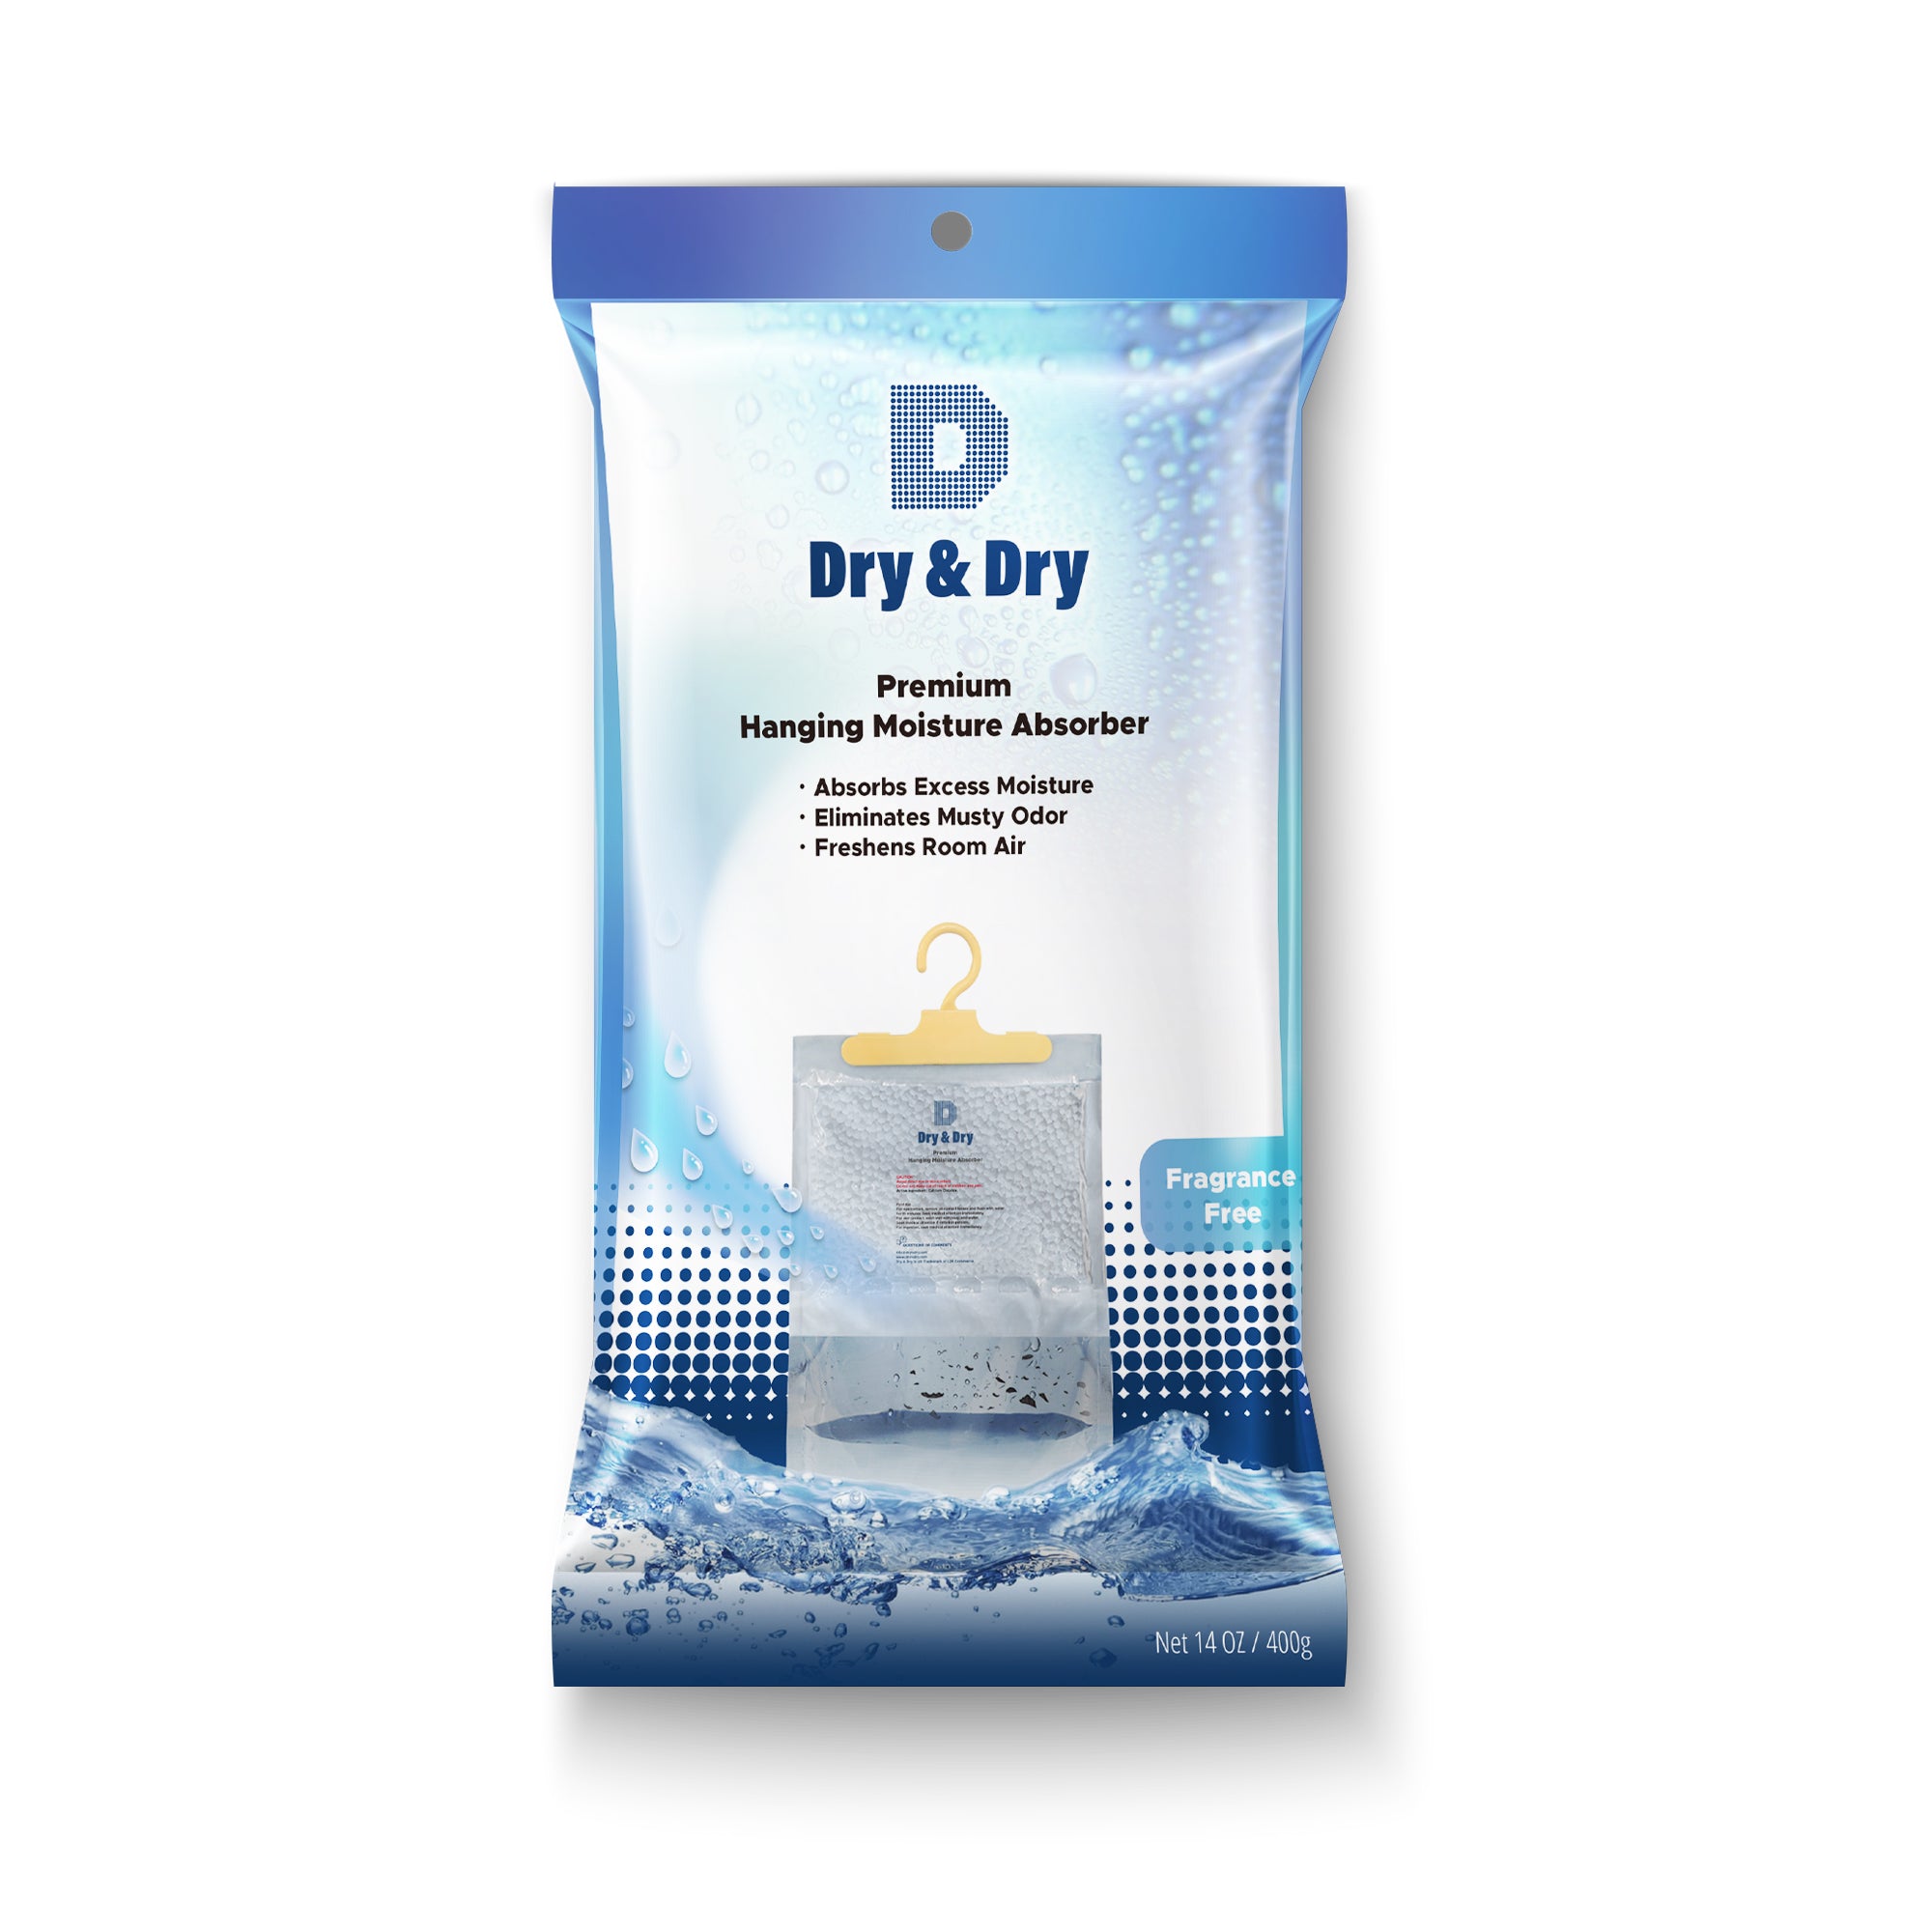 [90 pack] [Net 7 oz/Pack]  “Dry & Dry” Premium Hanging Moisture Absorber to Control Excess Moisture for Basements, Bathrooms, Laundry Rooms, and Enclosed Spaces